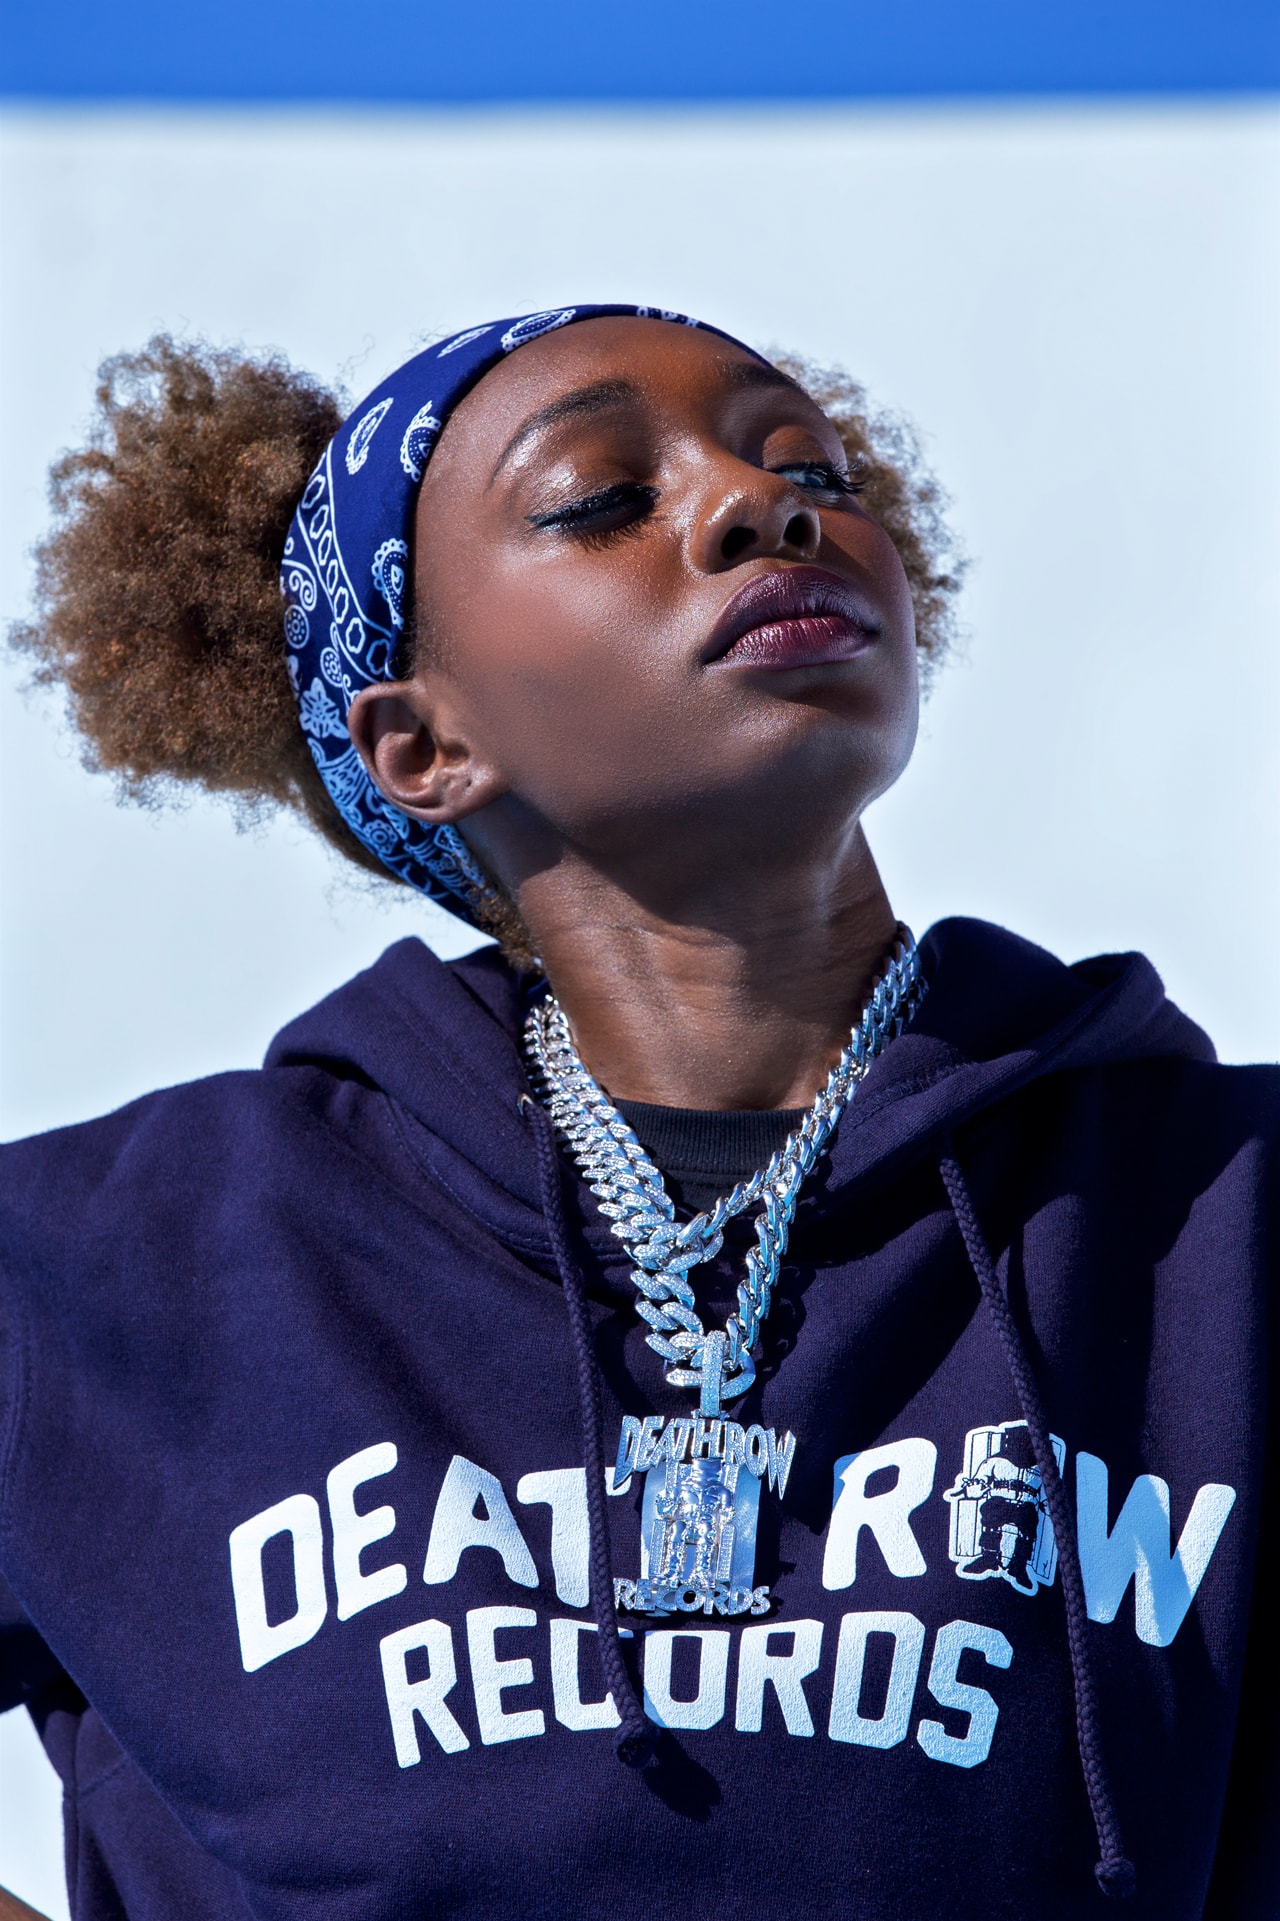 Death Row Records King Ice Jewelry hip-hop tupac snoop dogg iconic infamous logo chain pendant medallion wu tang chief keef fans west coast suge knight rap music